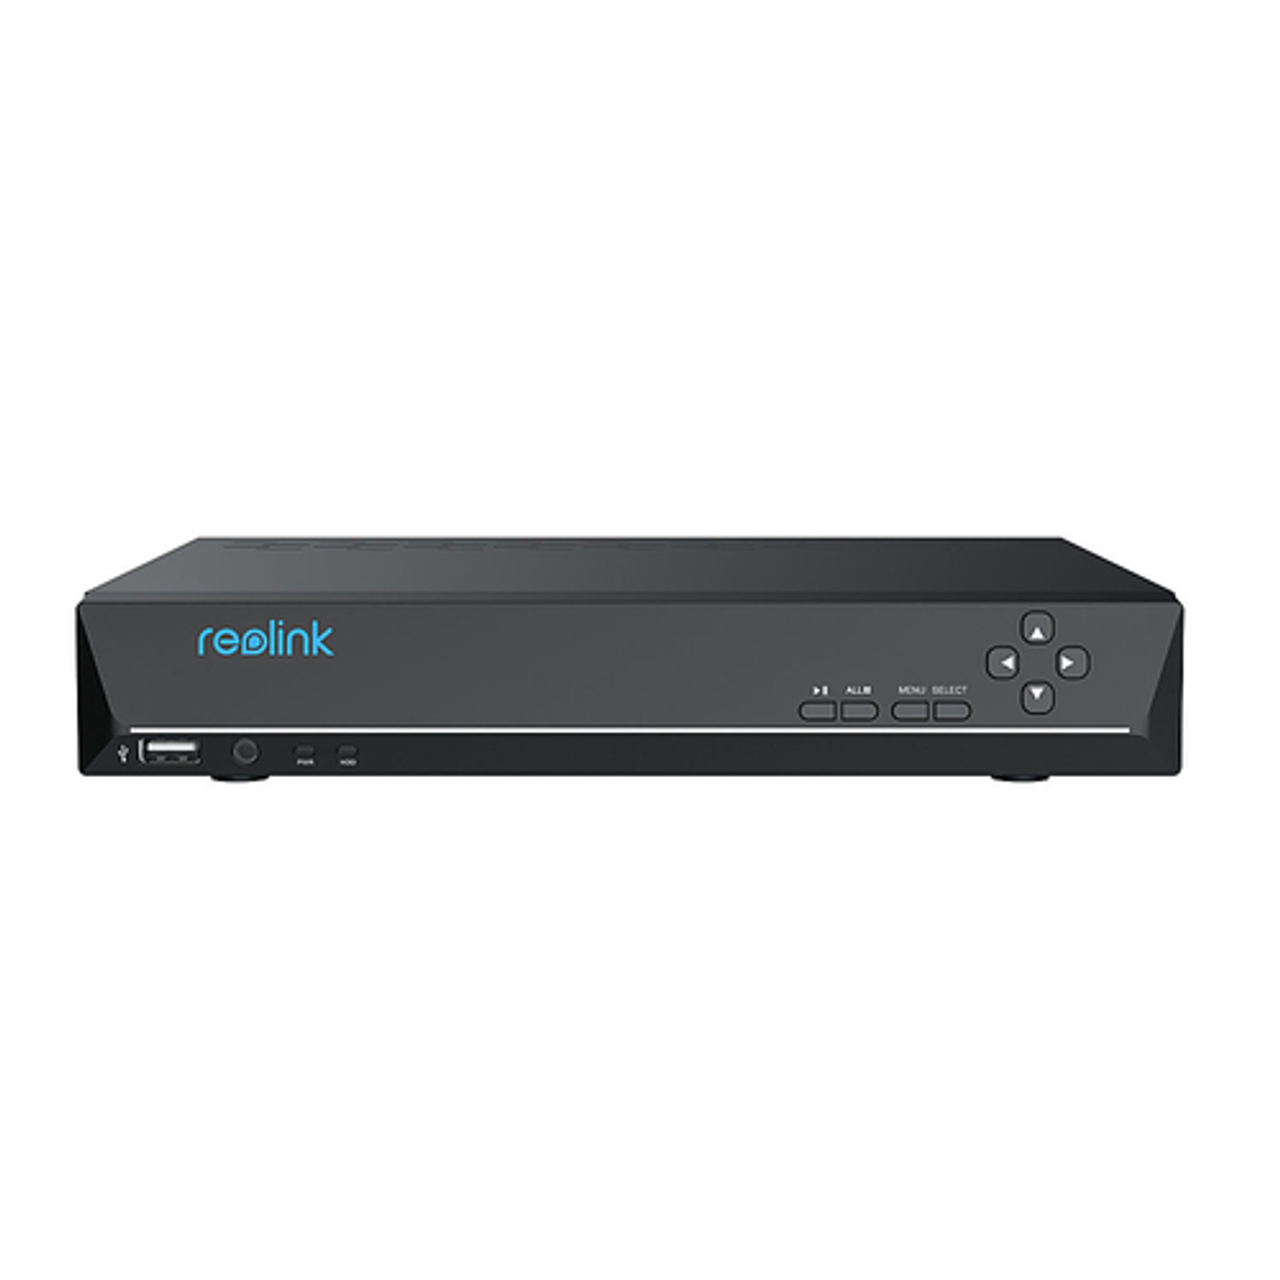 Reolink - 10MP 8 Channel  NVR System with 4X Dome Cameras - White,Black